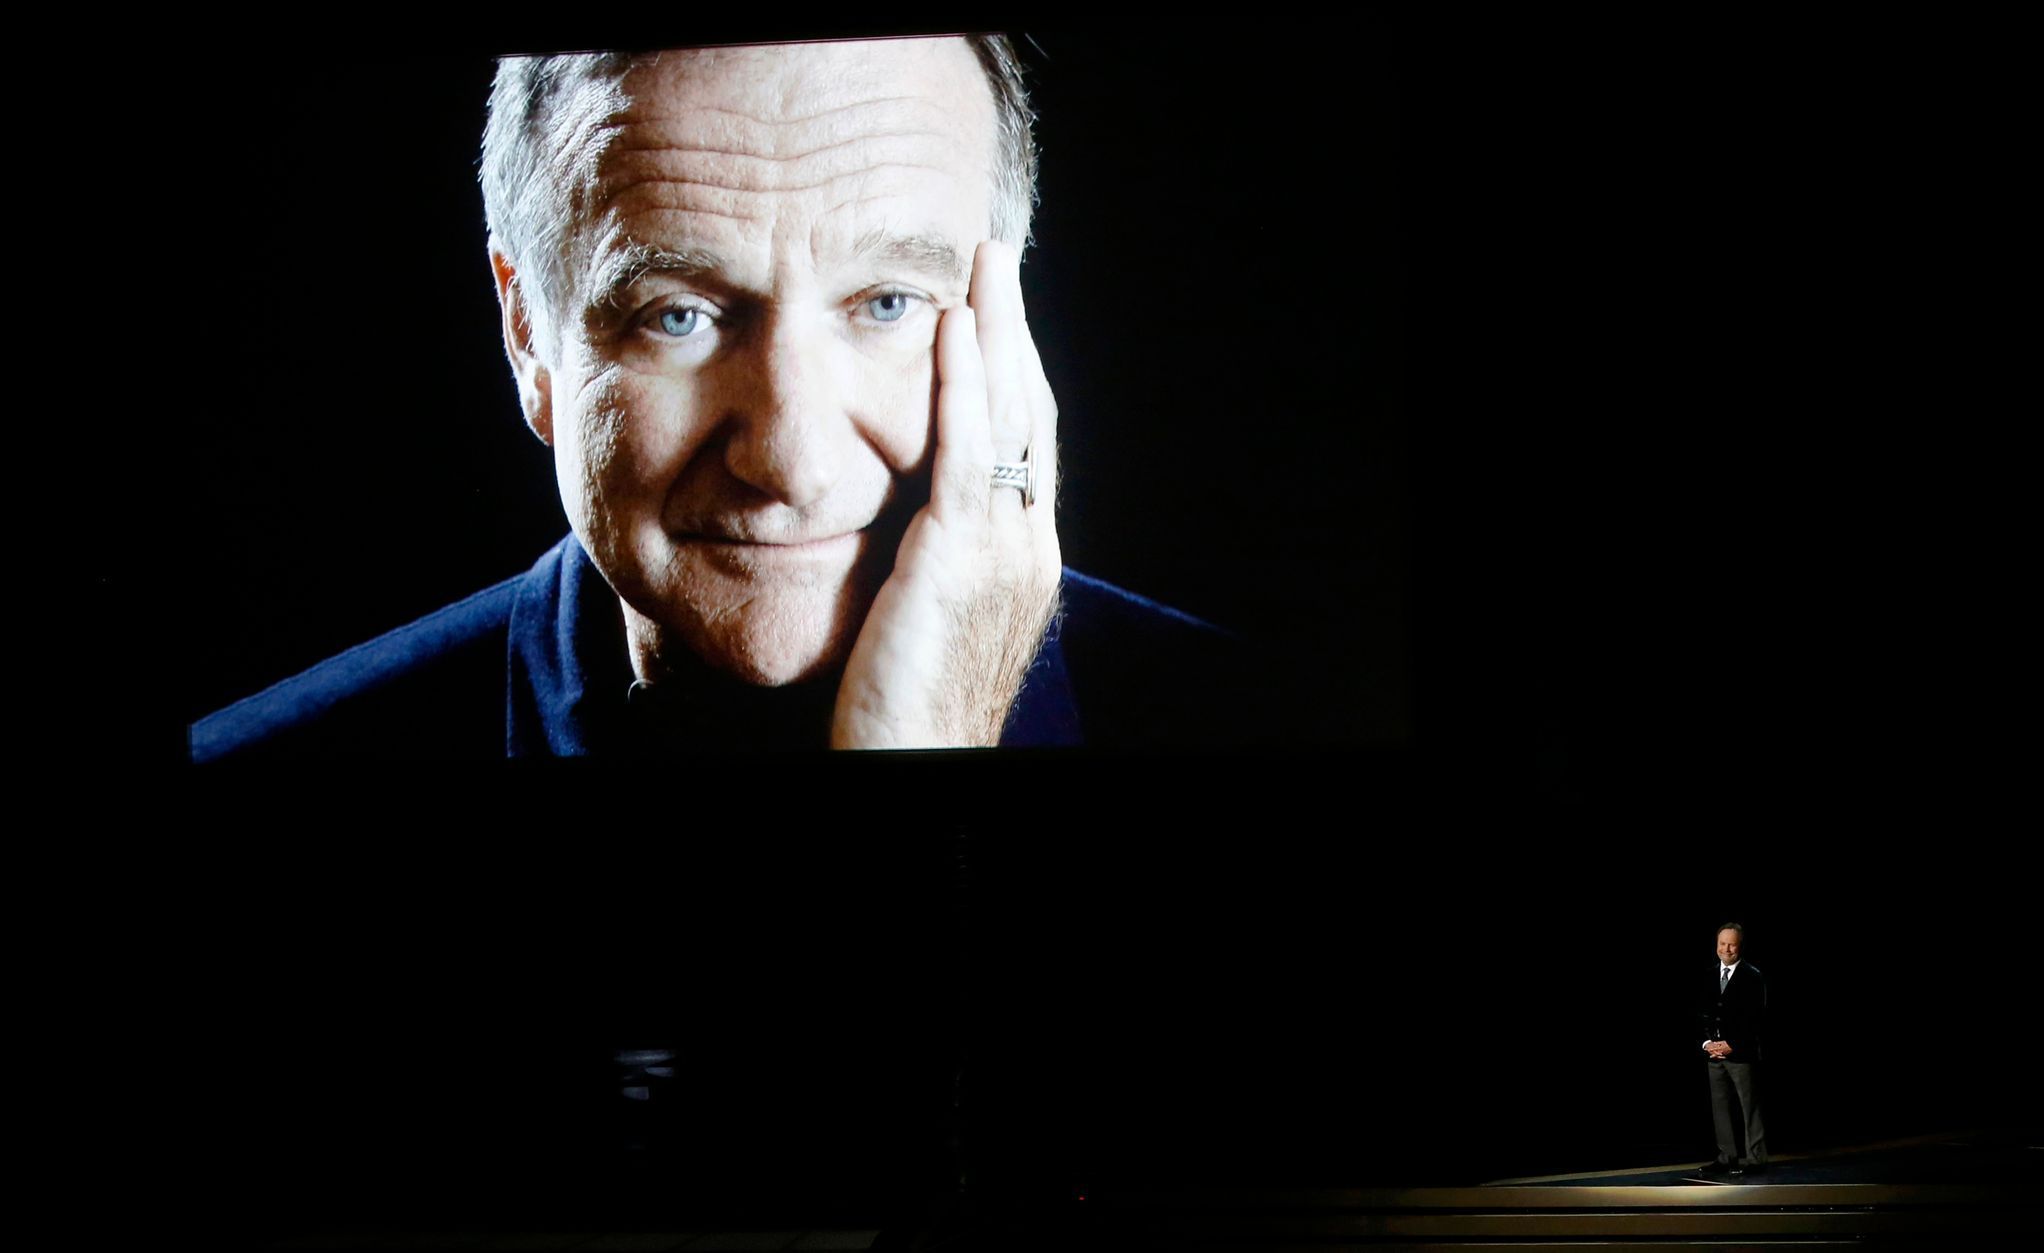 Billy Crystal takes the stage to pay tribute to Robin Williams, shown on a large screen, during the 66th Primetime Emmy Awards in Los Angeles